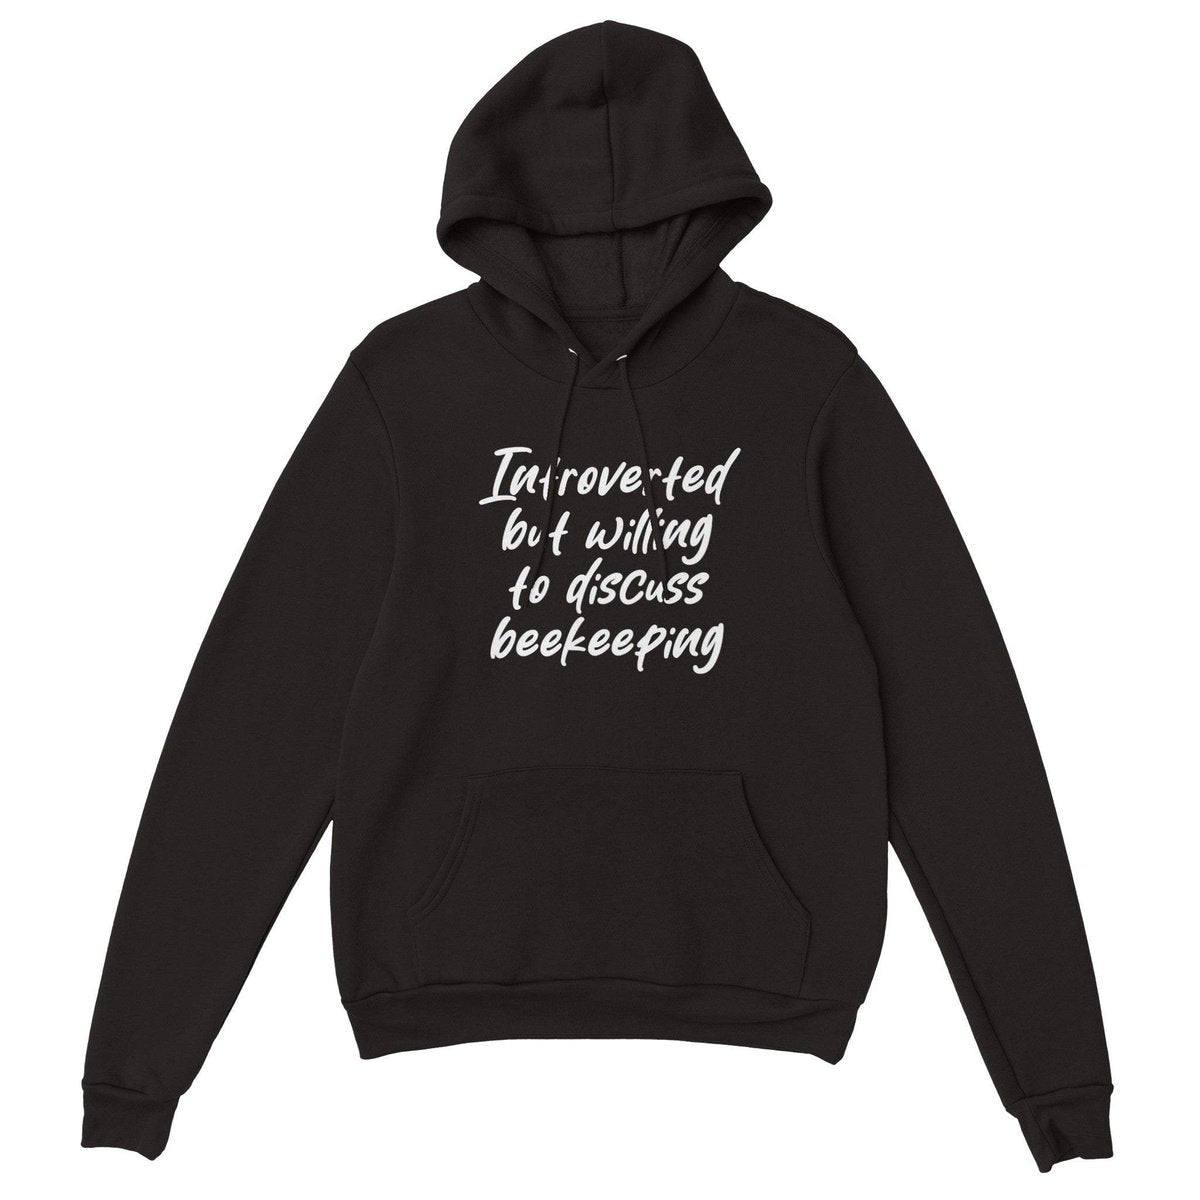 Introverted but willing to discuss beekeeping Hoodie - Premium Unisex Pullover Hoodie Australia Online Color Black / XS